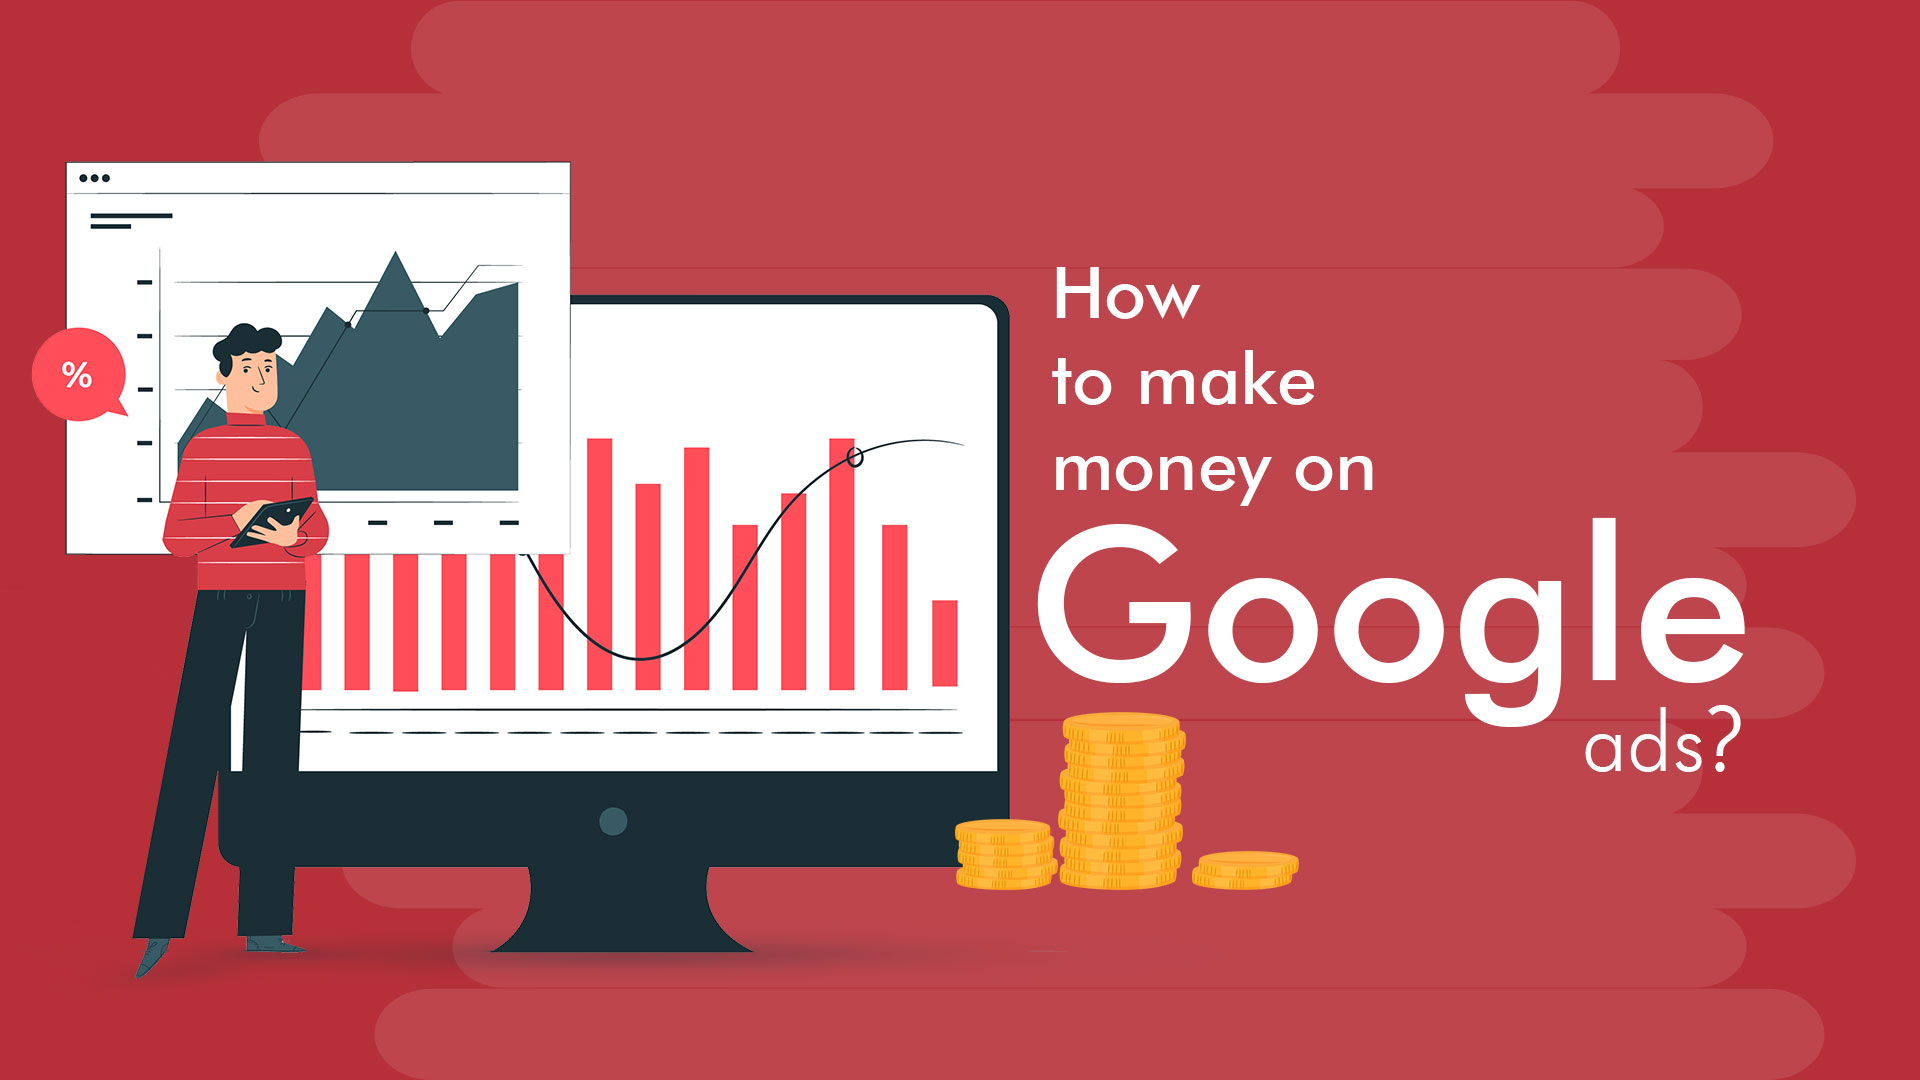 How to make money on Google ads?